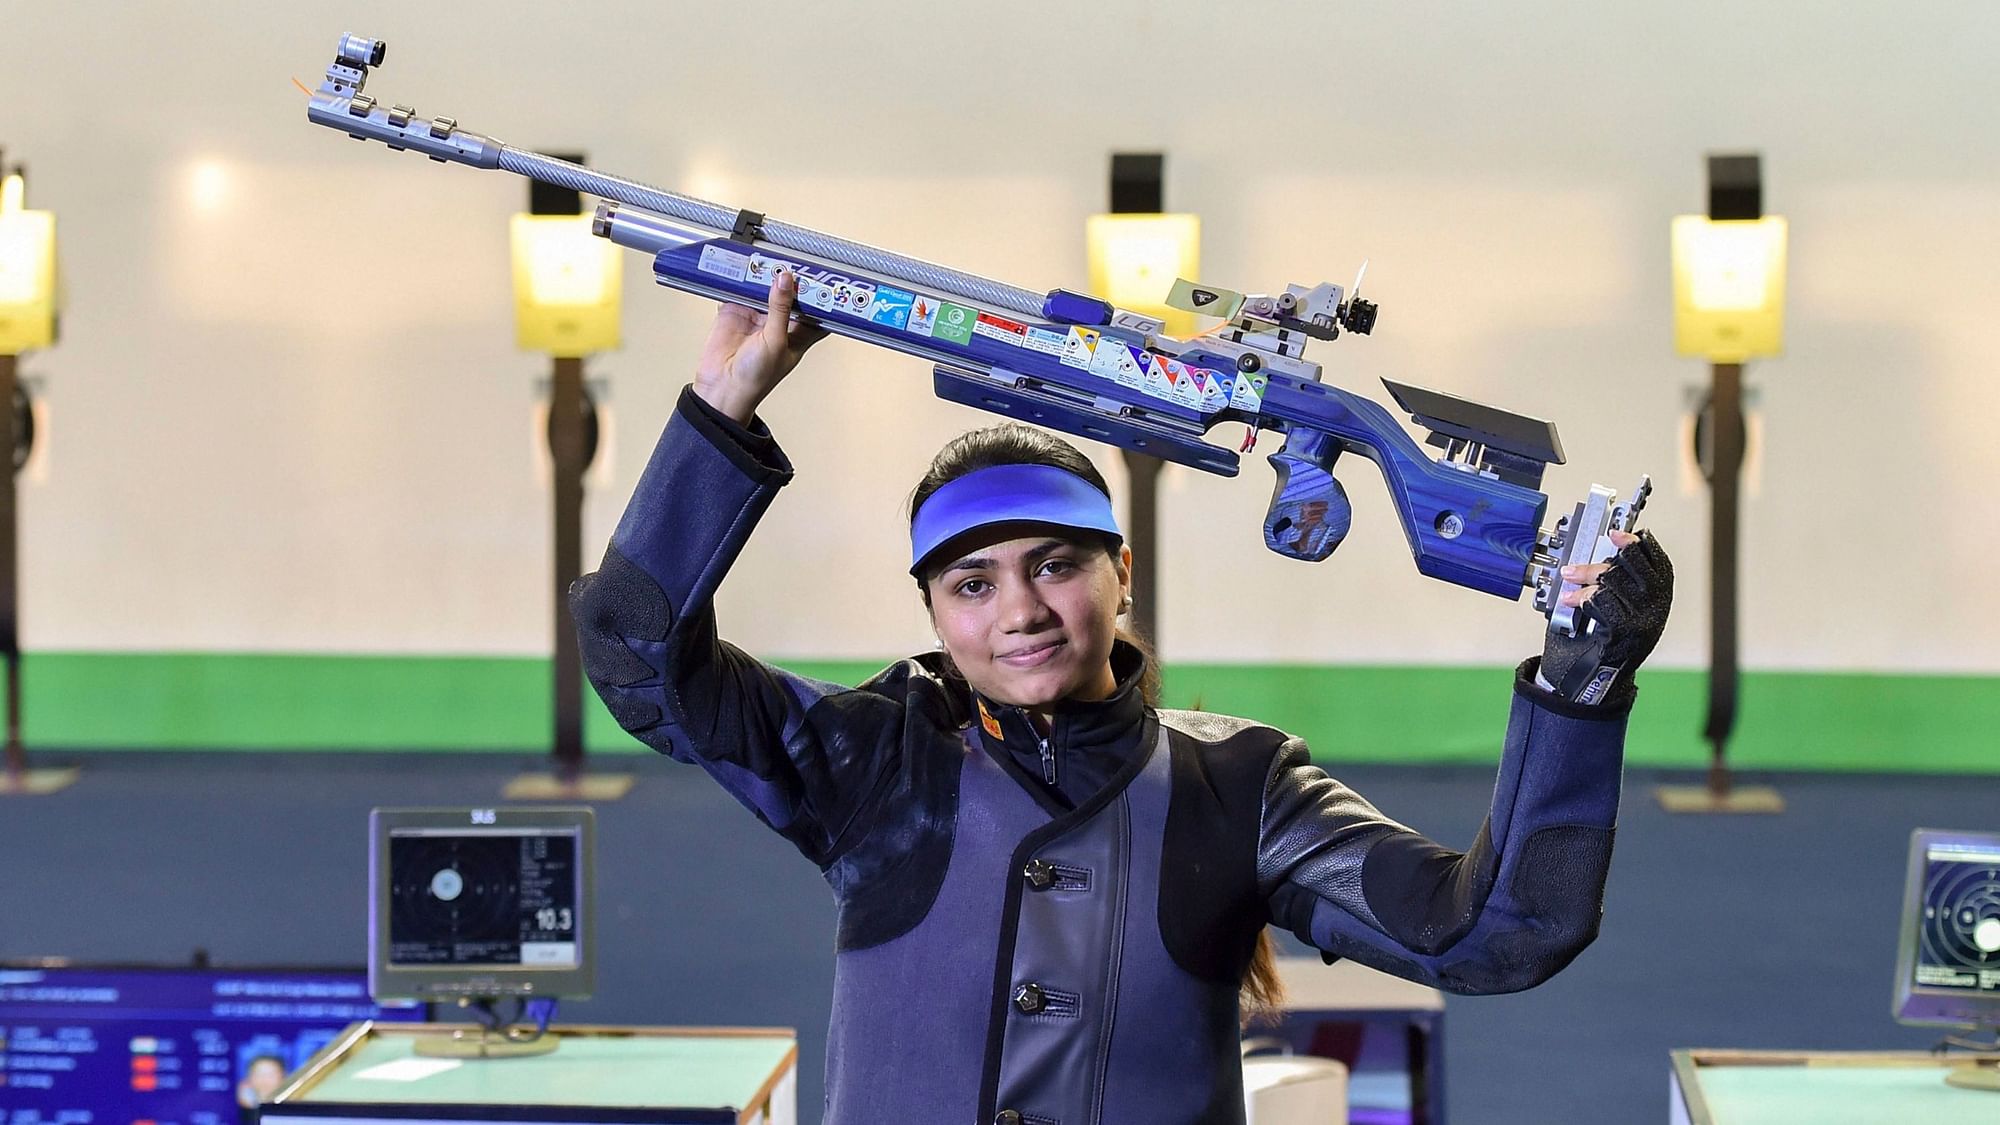 Apurvi Chandela clinched the women’s 10m Air Rifle gold at the ISSF World Cup in New Delhi.